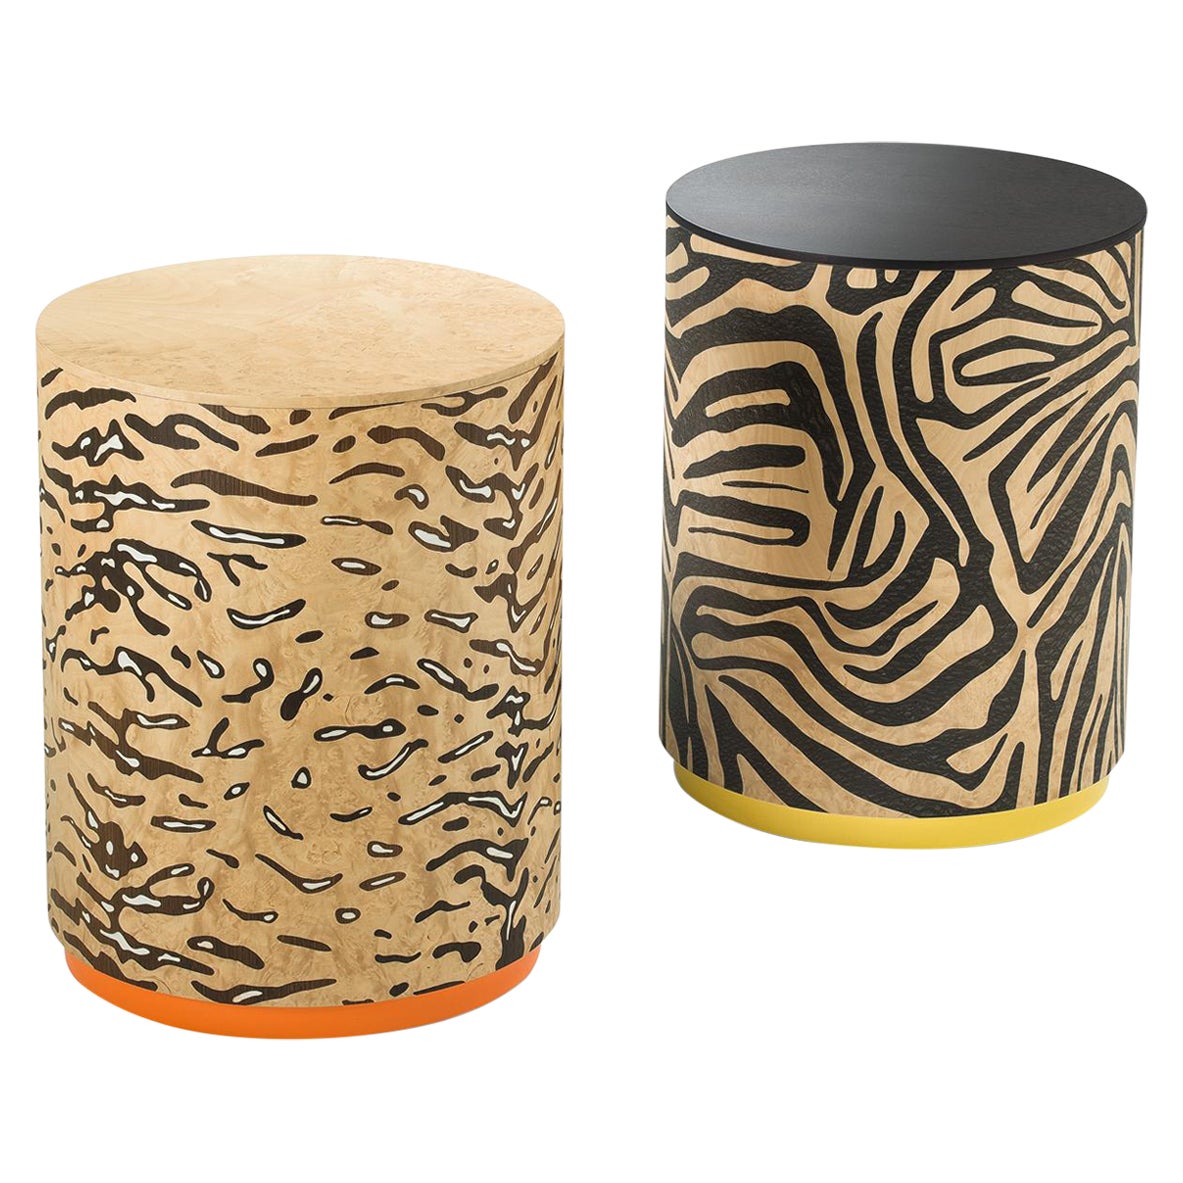 The stool is adorned with a distinctive zebra-striped inlay, adding a touch of the wild to your living space. Crafted with precision, the top features a rich American Dark Walnut finish, showcasing the wood's natural beauty and providing a luxurious